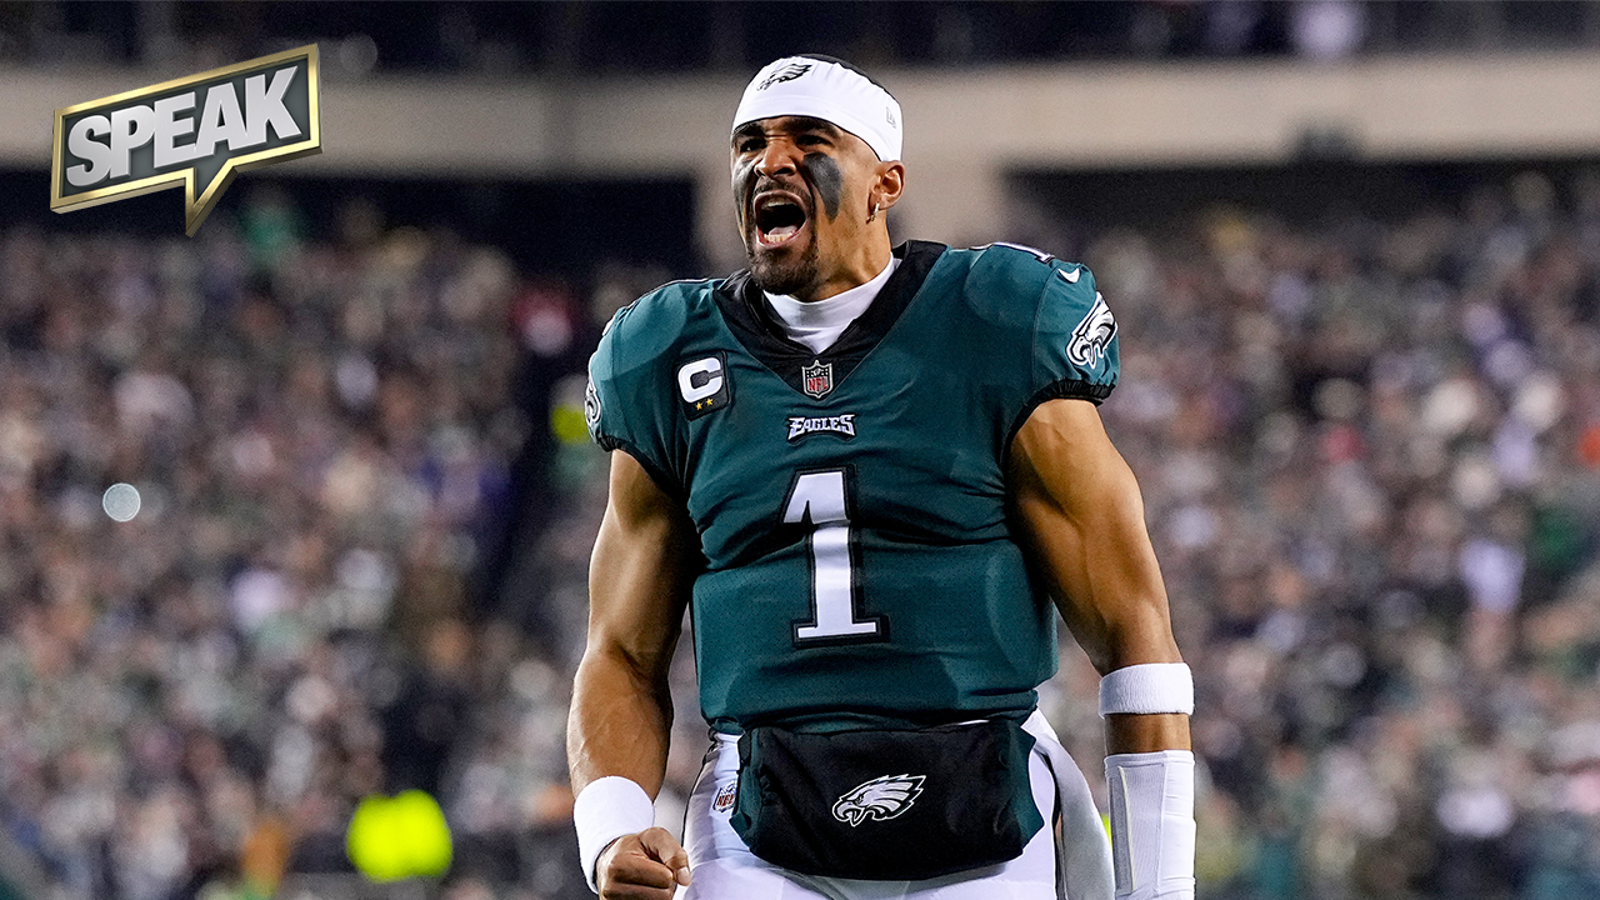 Have Eagles separated themselves in NFC after their offseason moves?